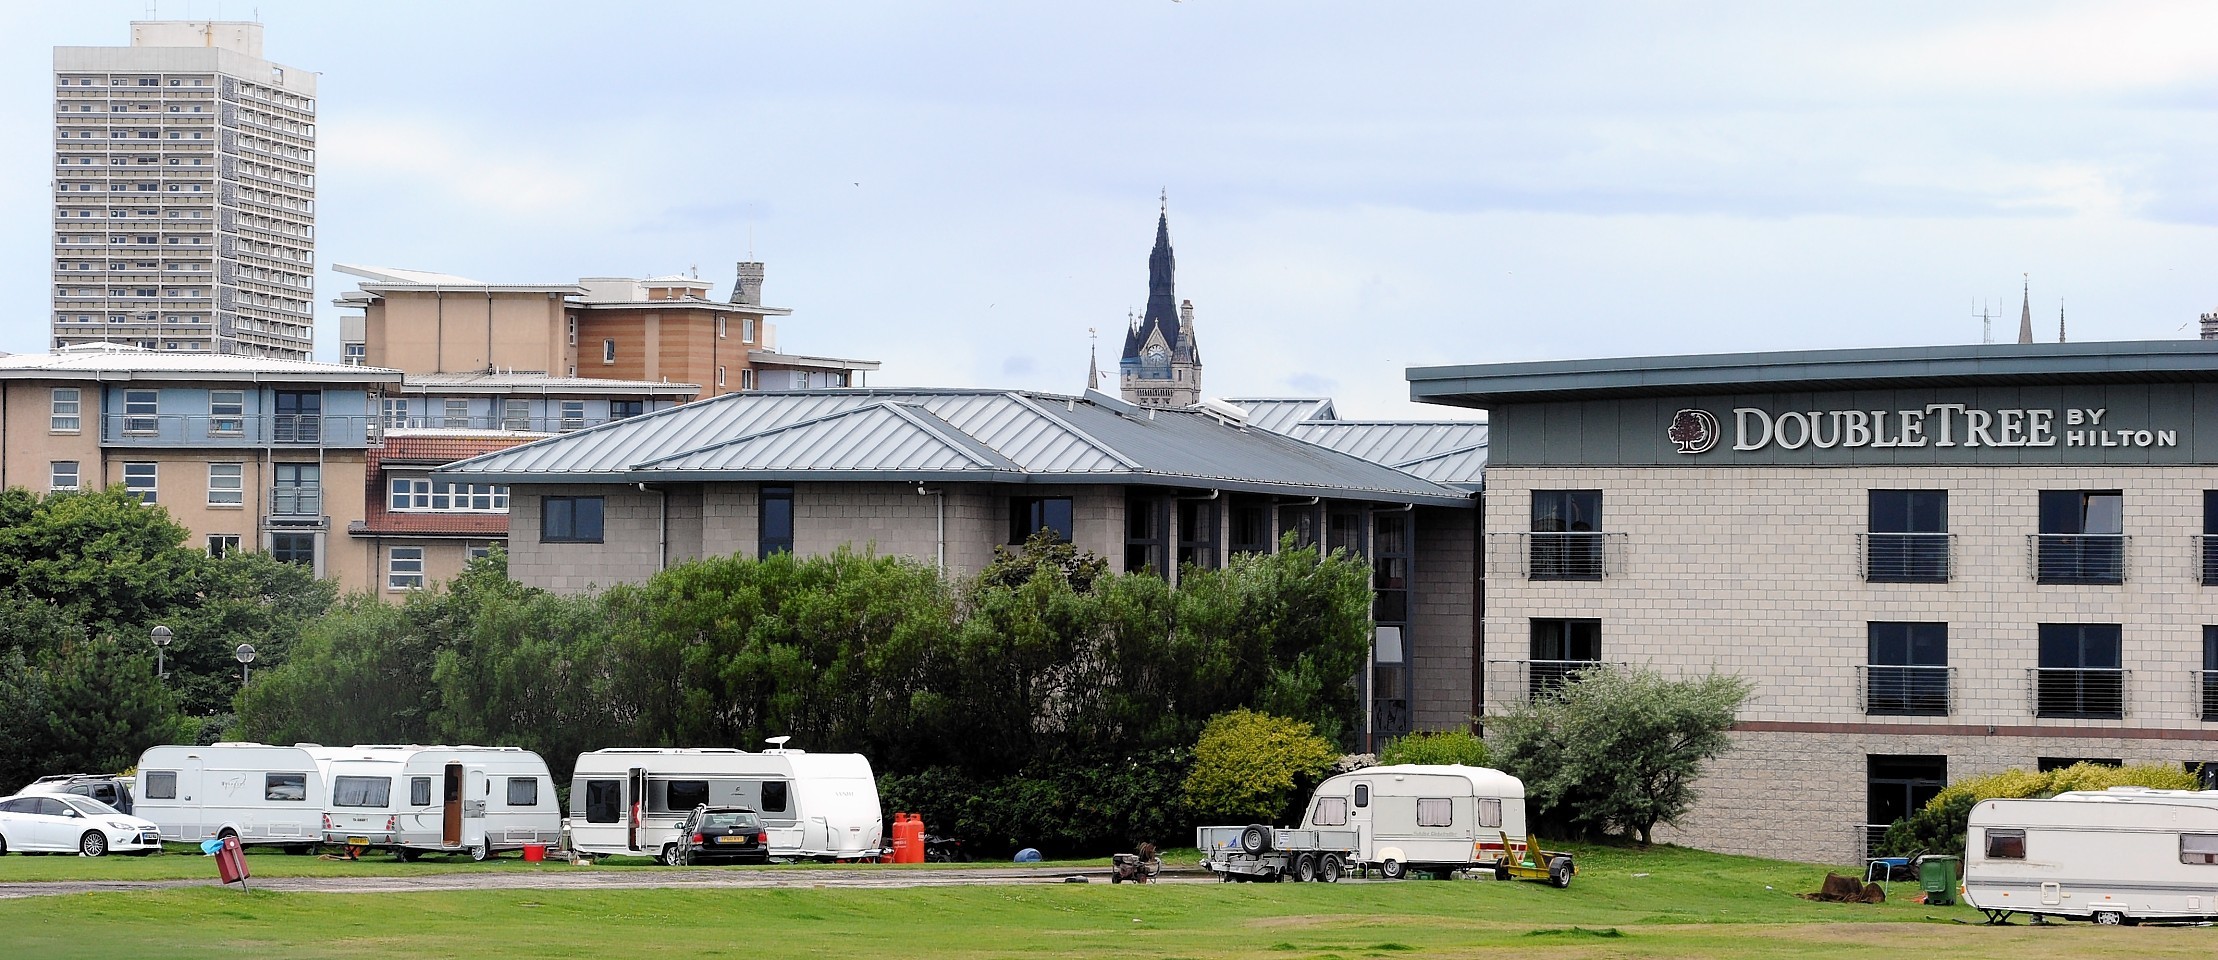 Travellers pitch up at Aberdeen's DoubleTree by Hilton